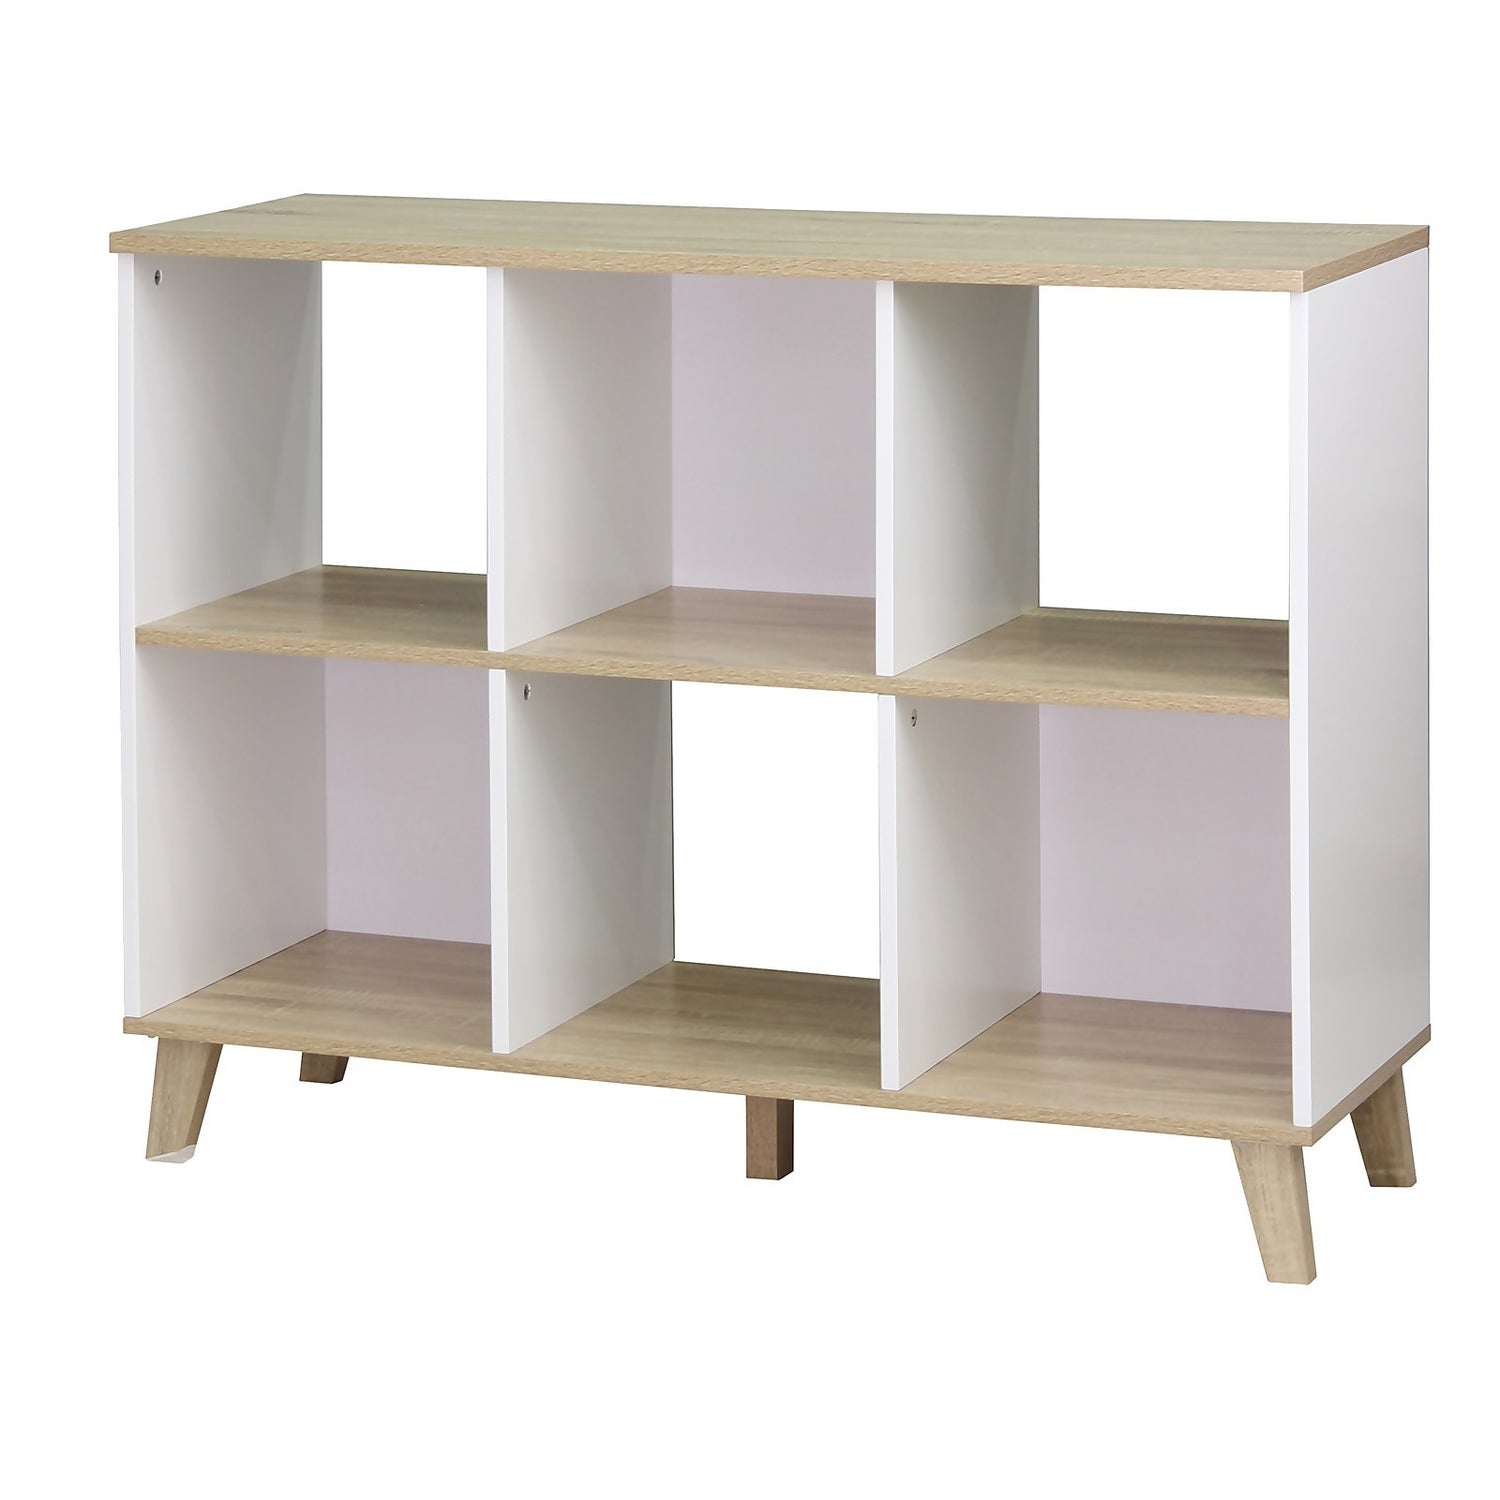 Clever Cube 2x3 Storage Unit With, White Cube Bookcase With Legs